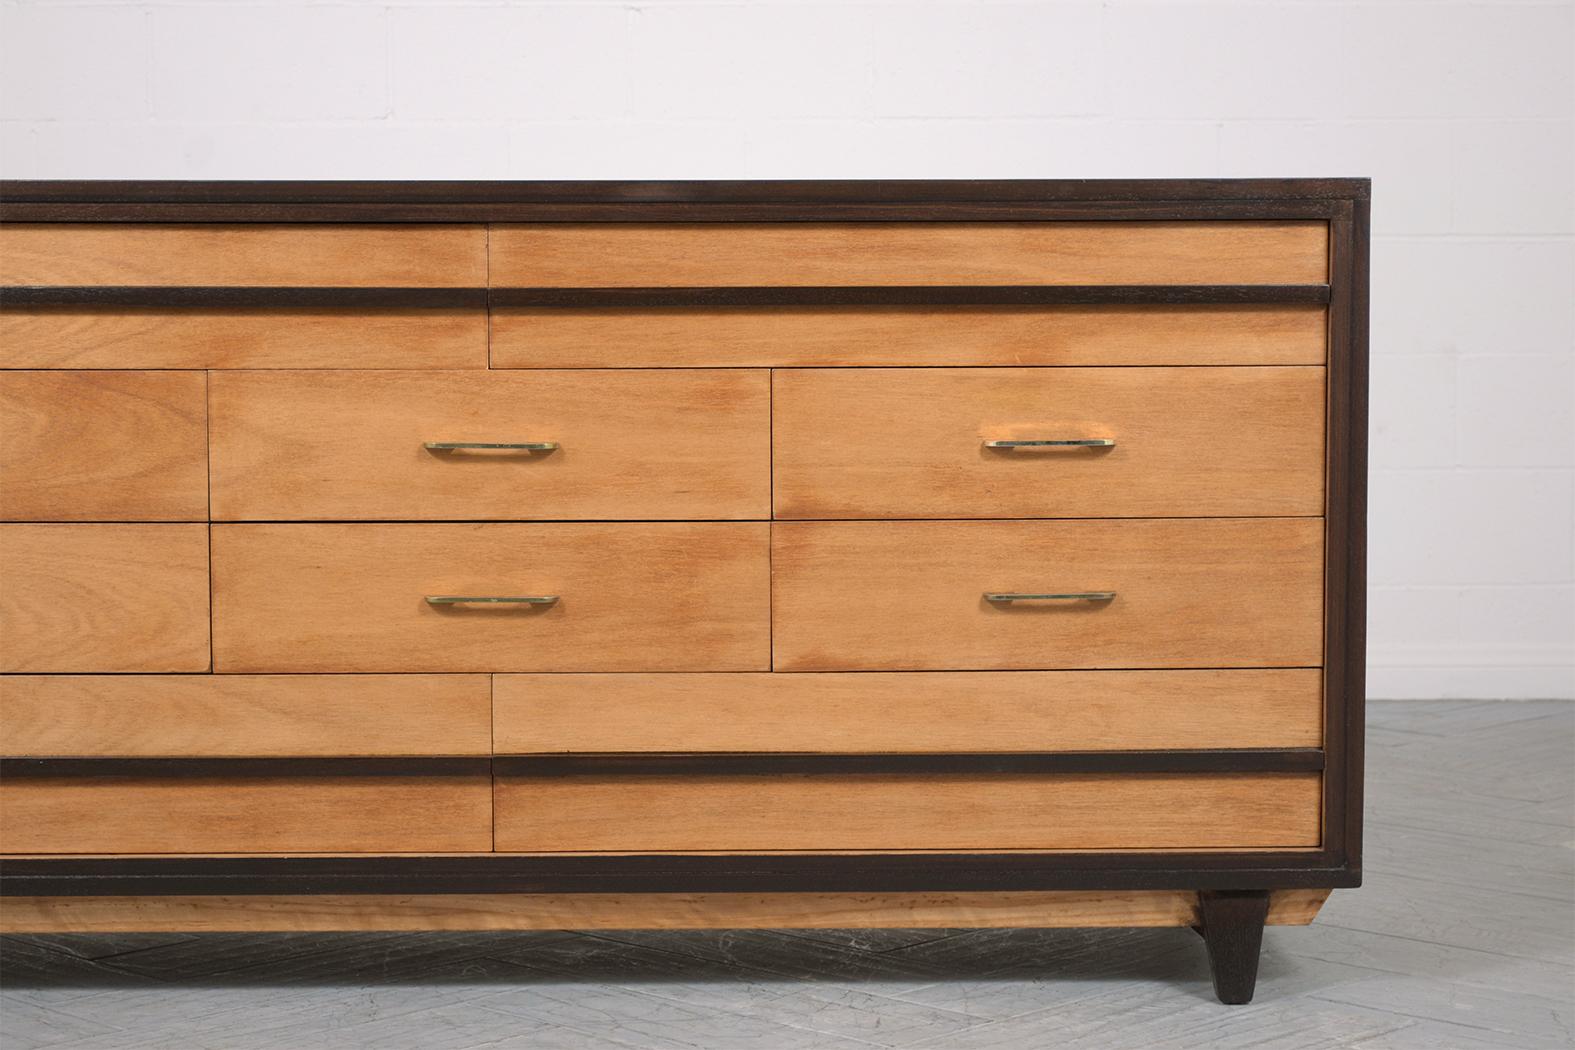 American Restored Vintage Mid-Century Modern Walnut Chest of Drawers with Brass Handles For Sale